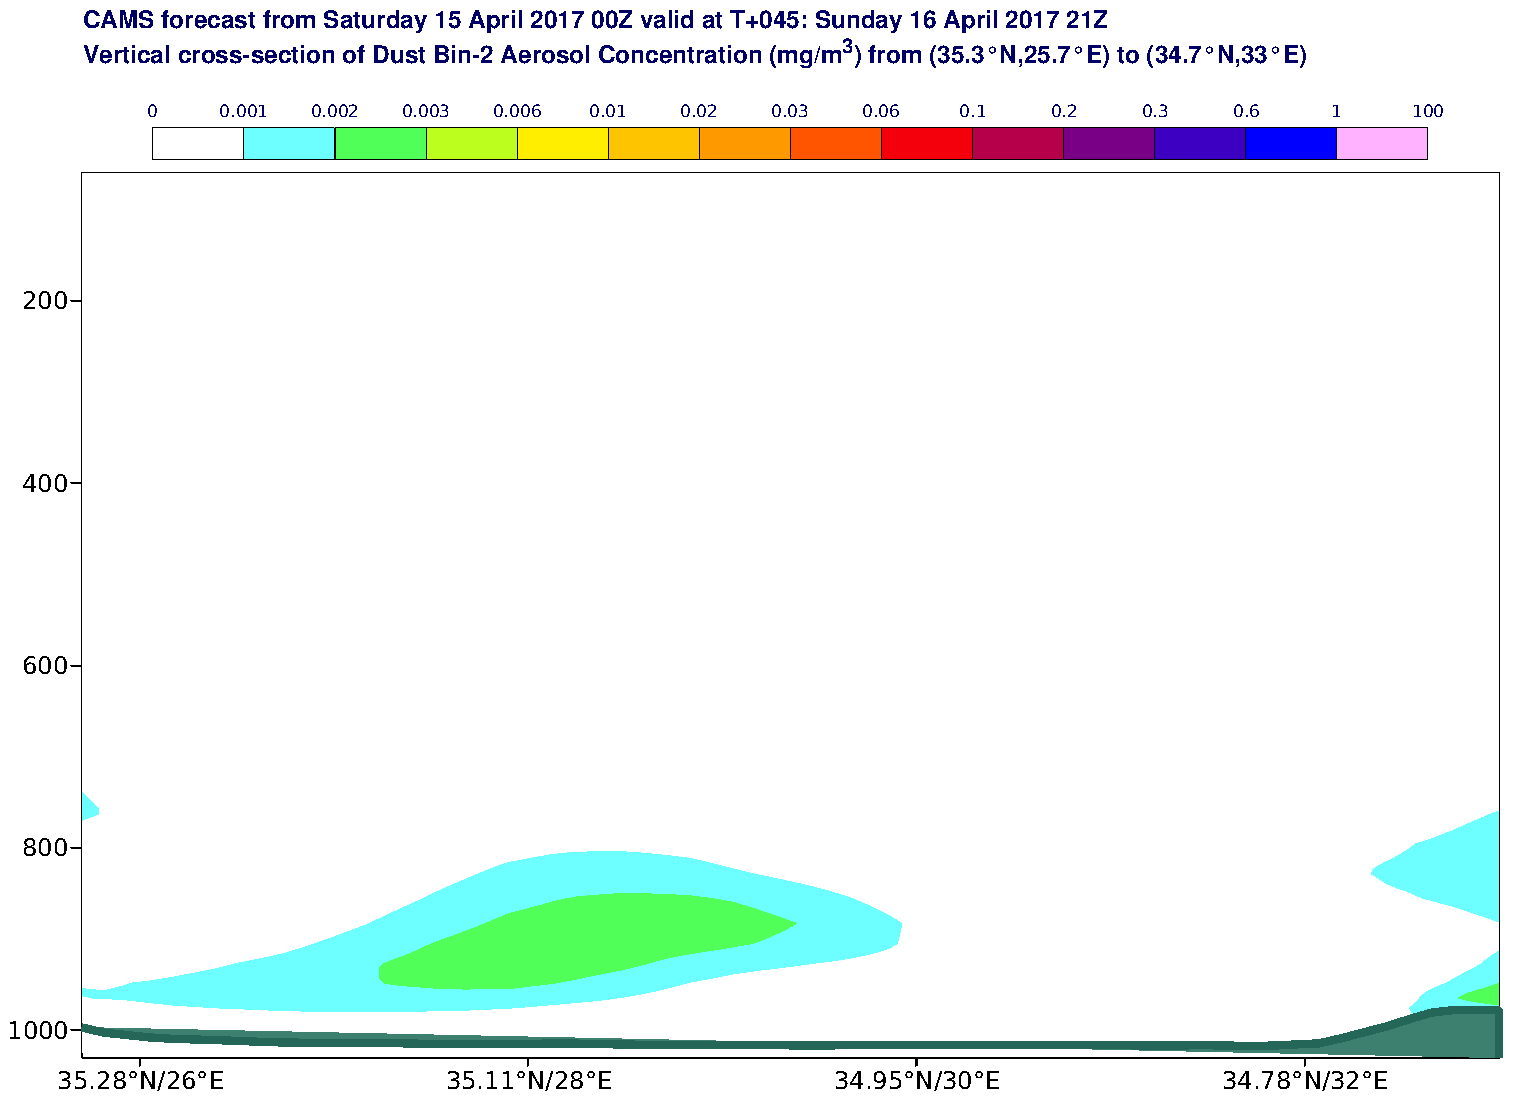 Vertical cross-section of Dust Bin-2 Aerosol Concentration (mg/m3) valid at T45 - 2017-04-16 21:00